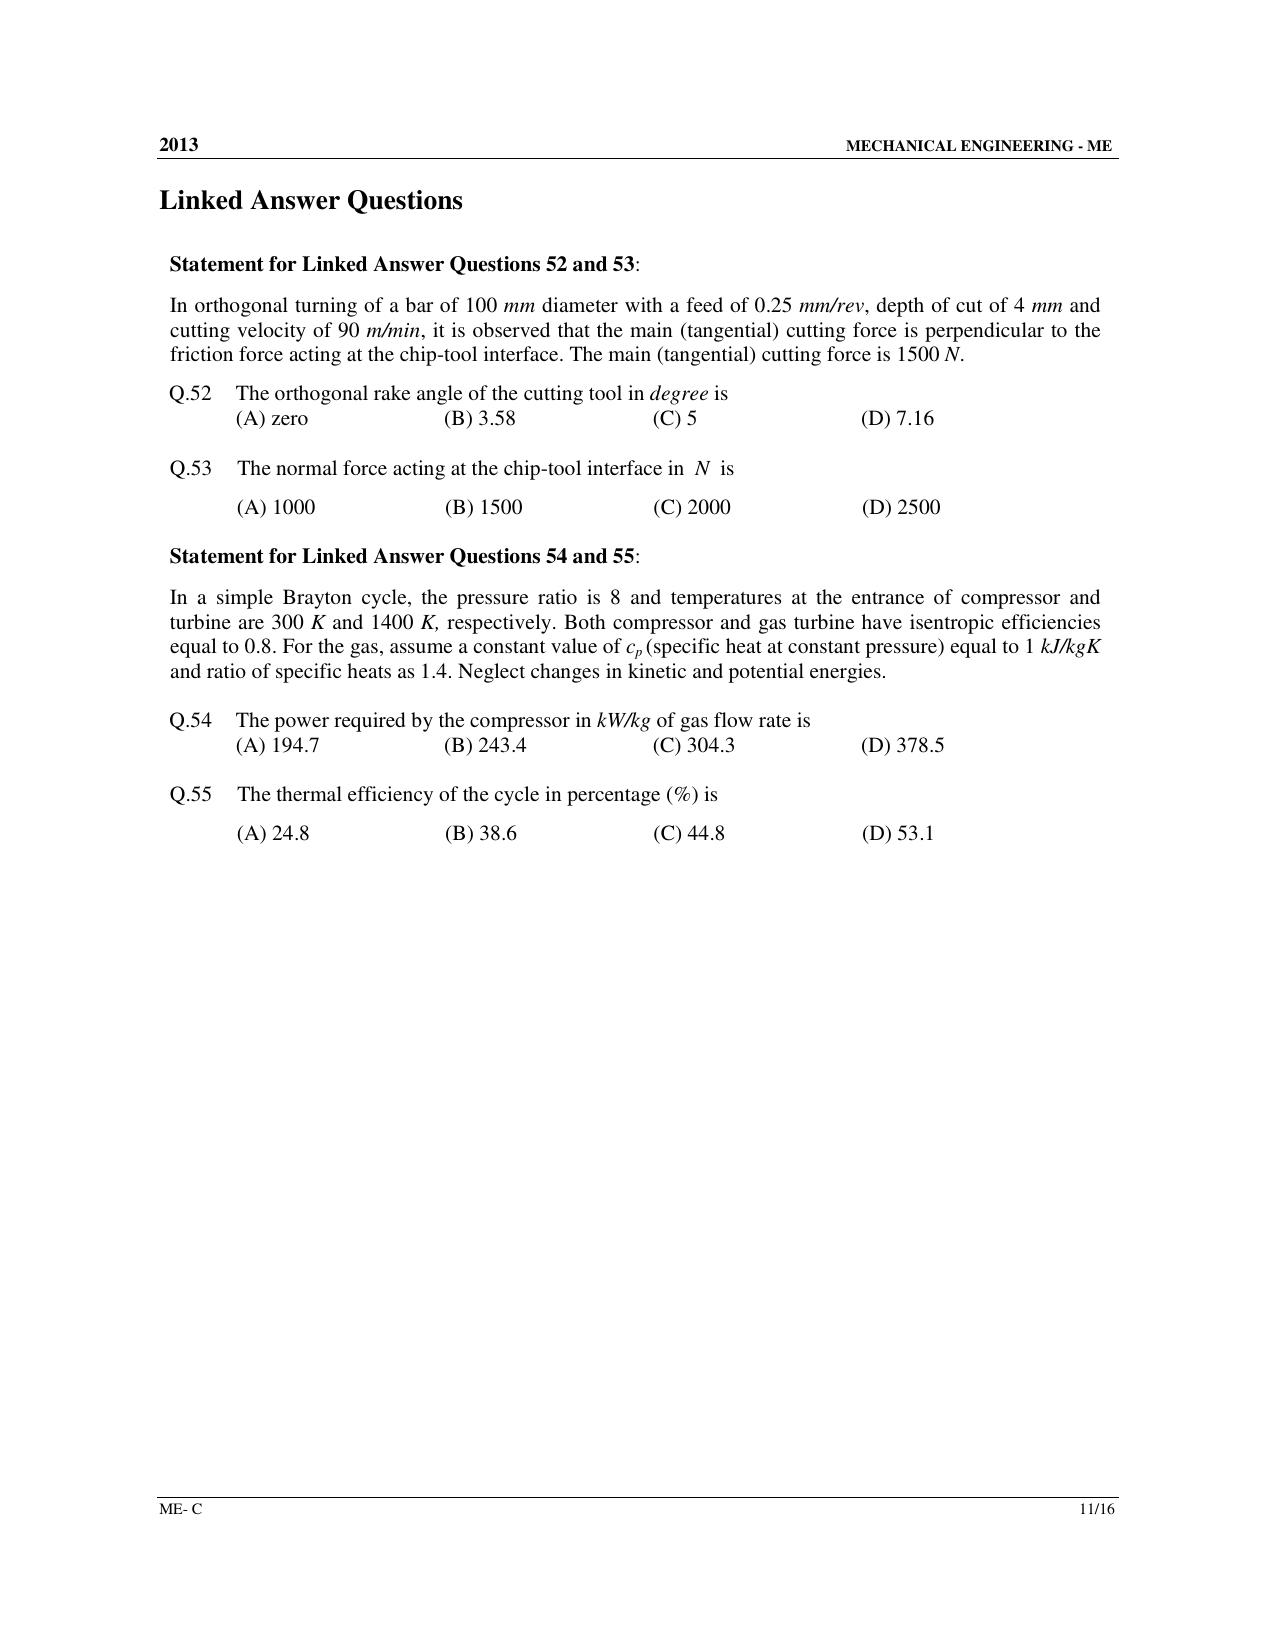 GATE 2013 Mechanical Engineering (ME) Question Paper with Answer Key - Page 40